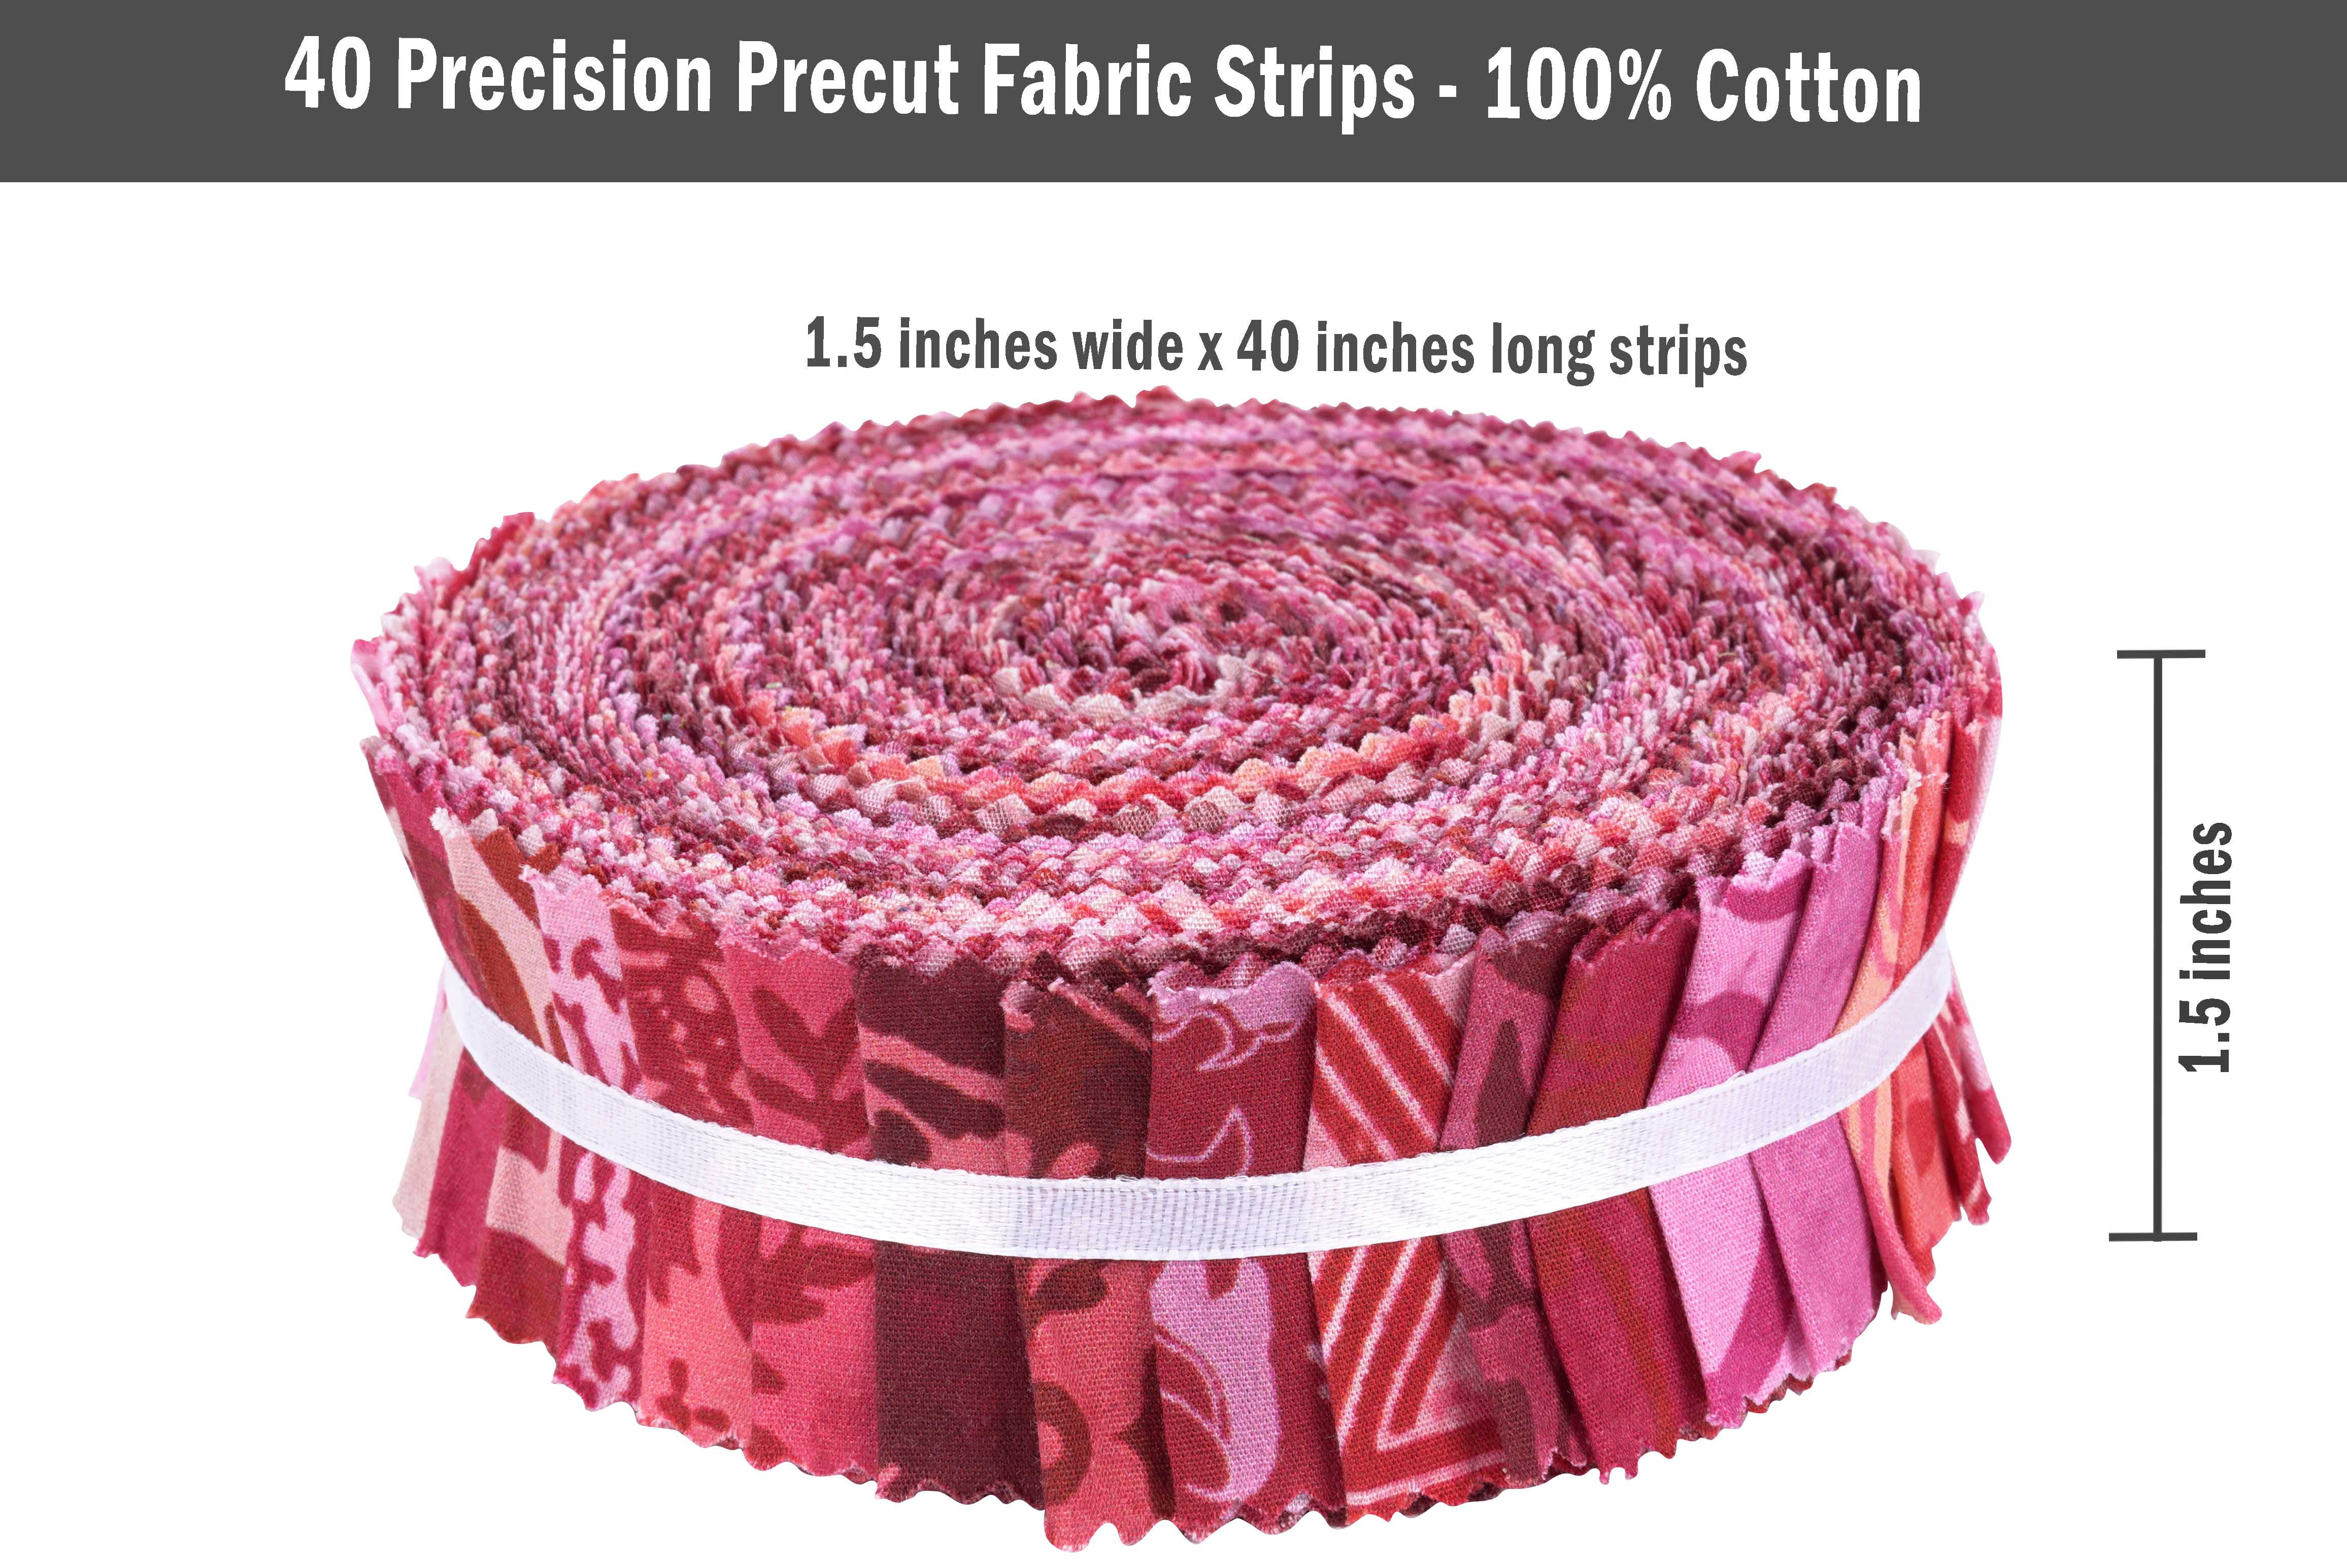 Soimoi 40Pcs Batik Print Precut Fabrics Strips Roll Up 1.5x42inches Cotton  Jelly Rolls for Quilting - Red